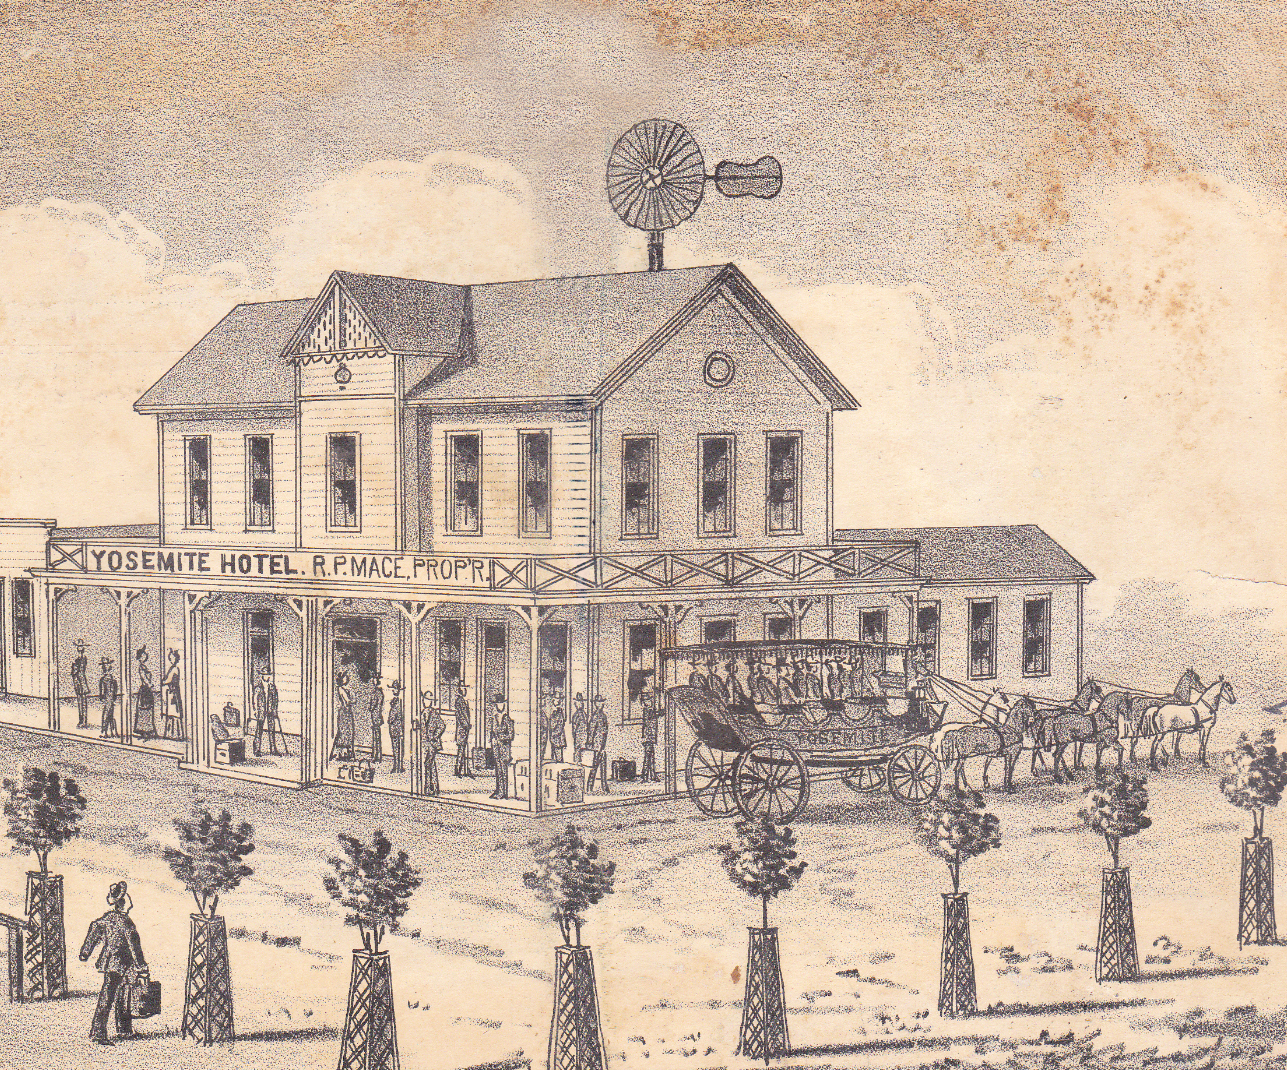 Drawing of the Yosemite Hotel and Doctor's Office